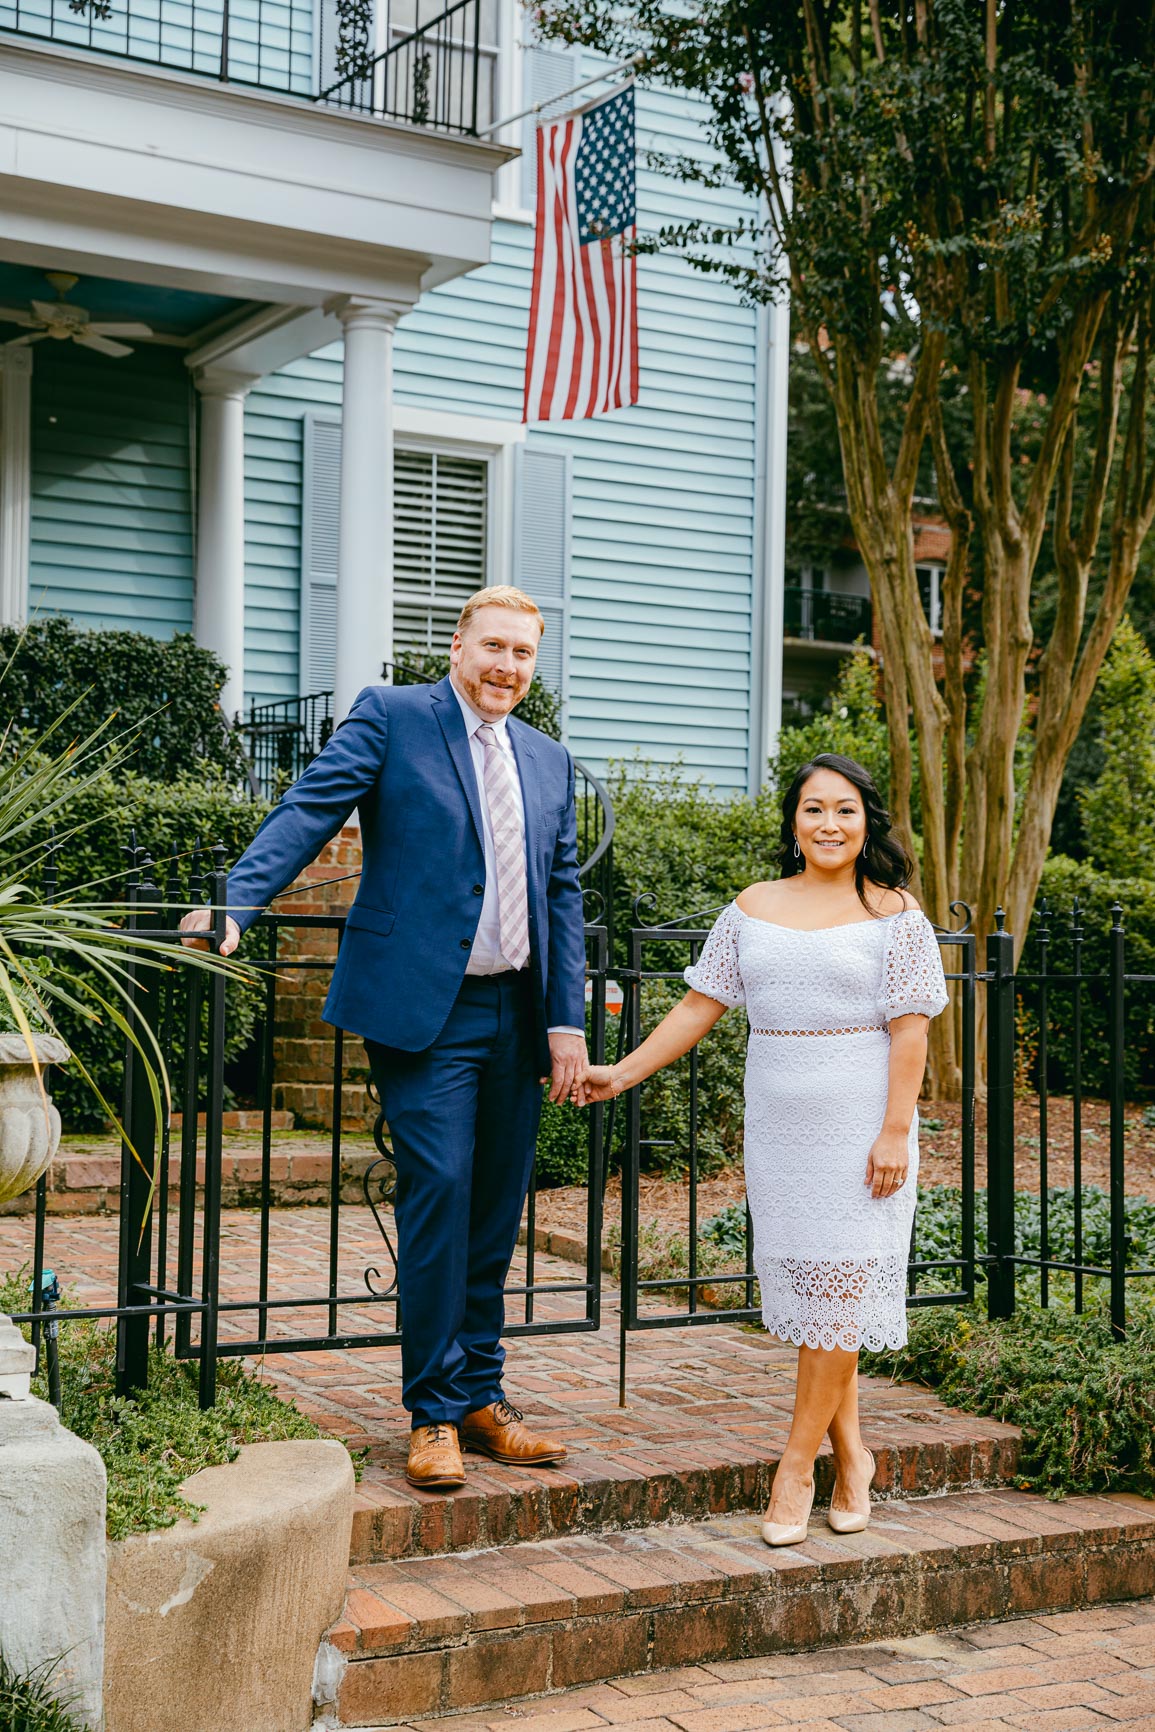 Uptown Charlotte engagement session shot by Nhieu Tang Photography | nhieutang.com